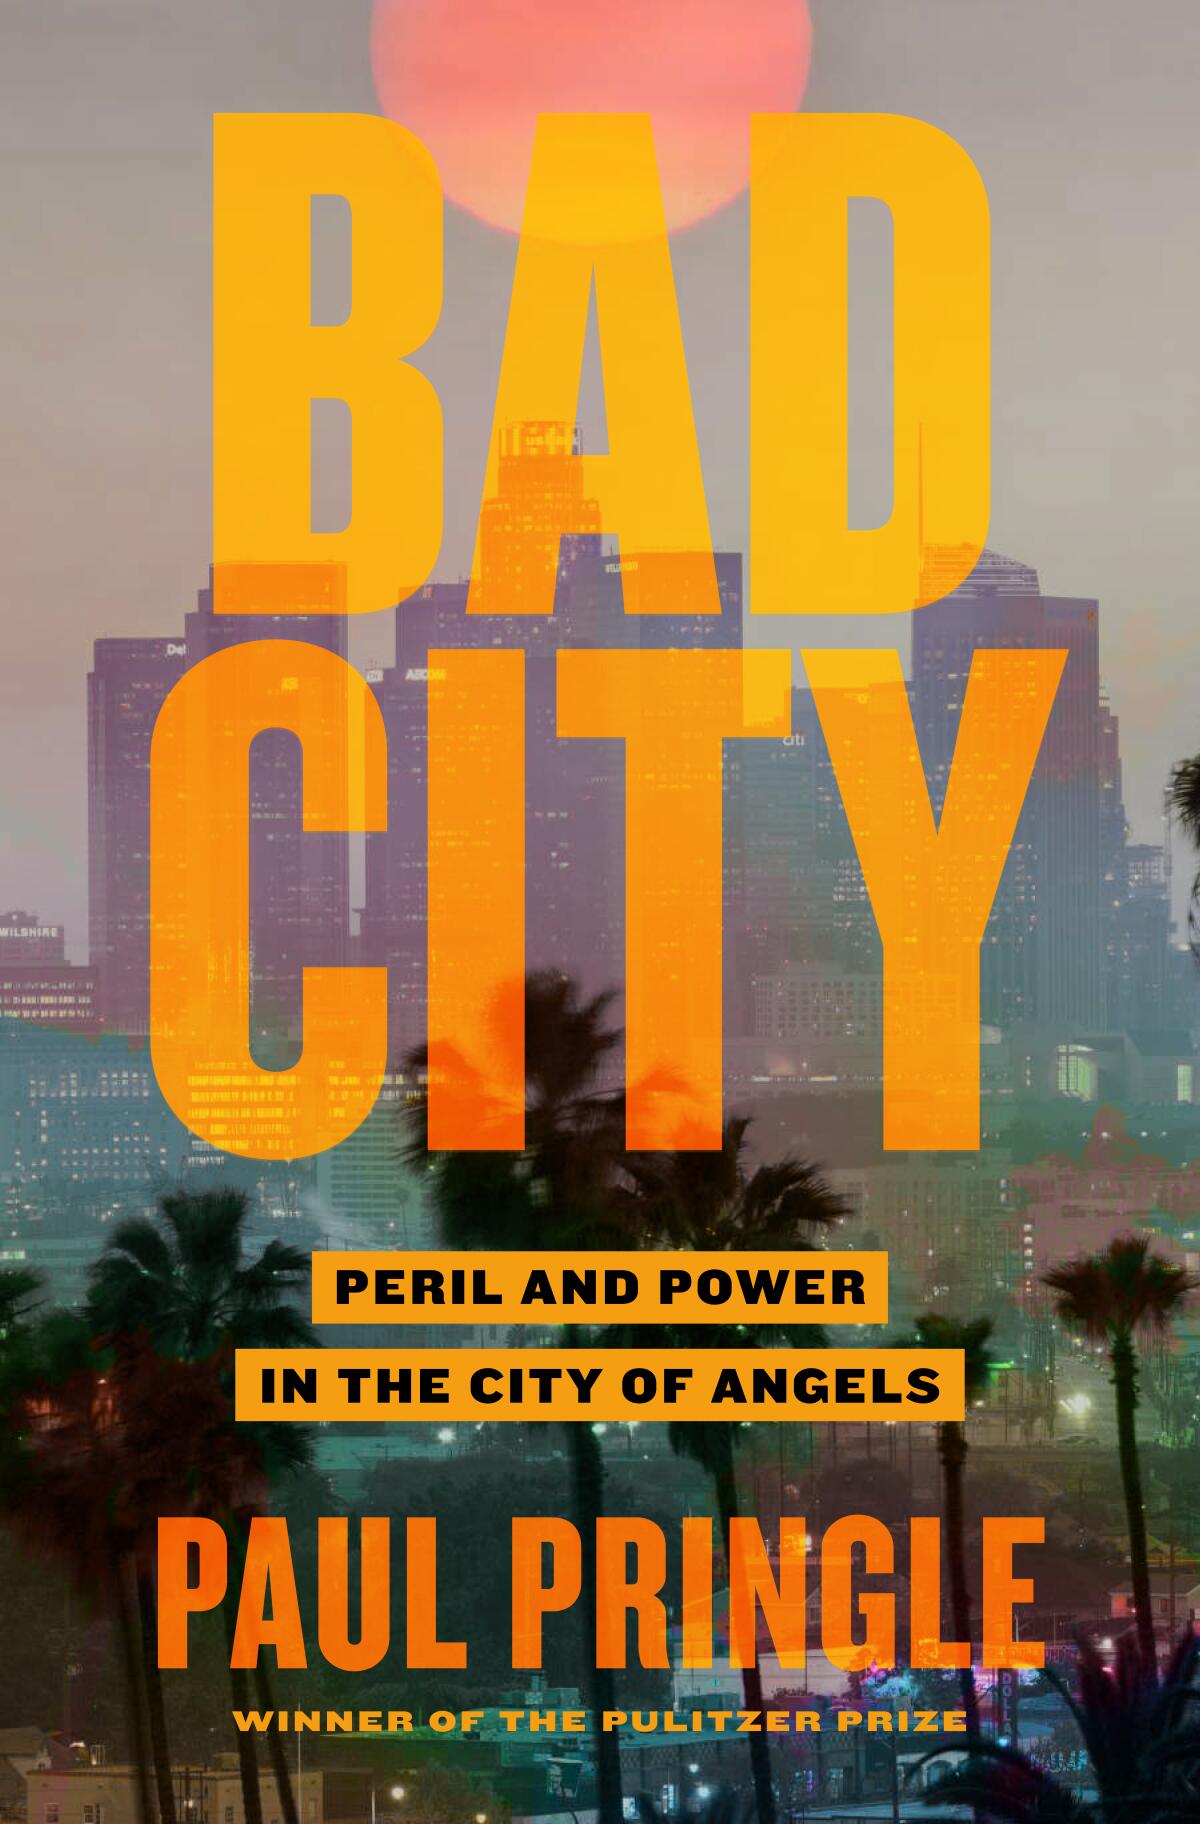 "Bad City: Peril and Power in the City of Angeles," by Paul Pringle.